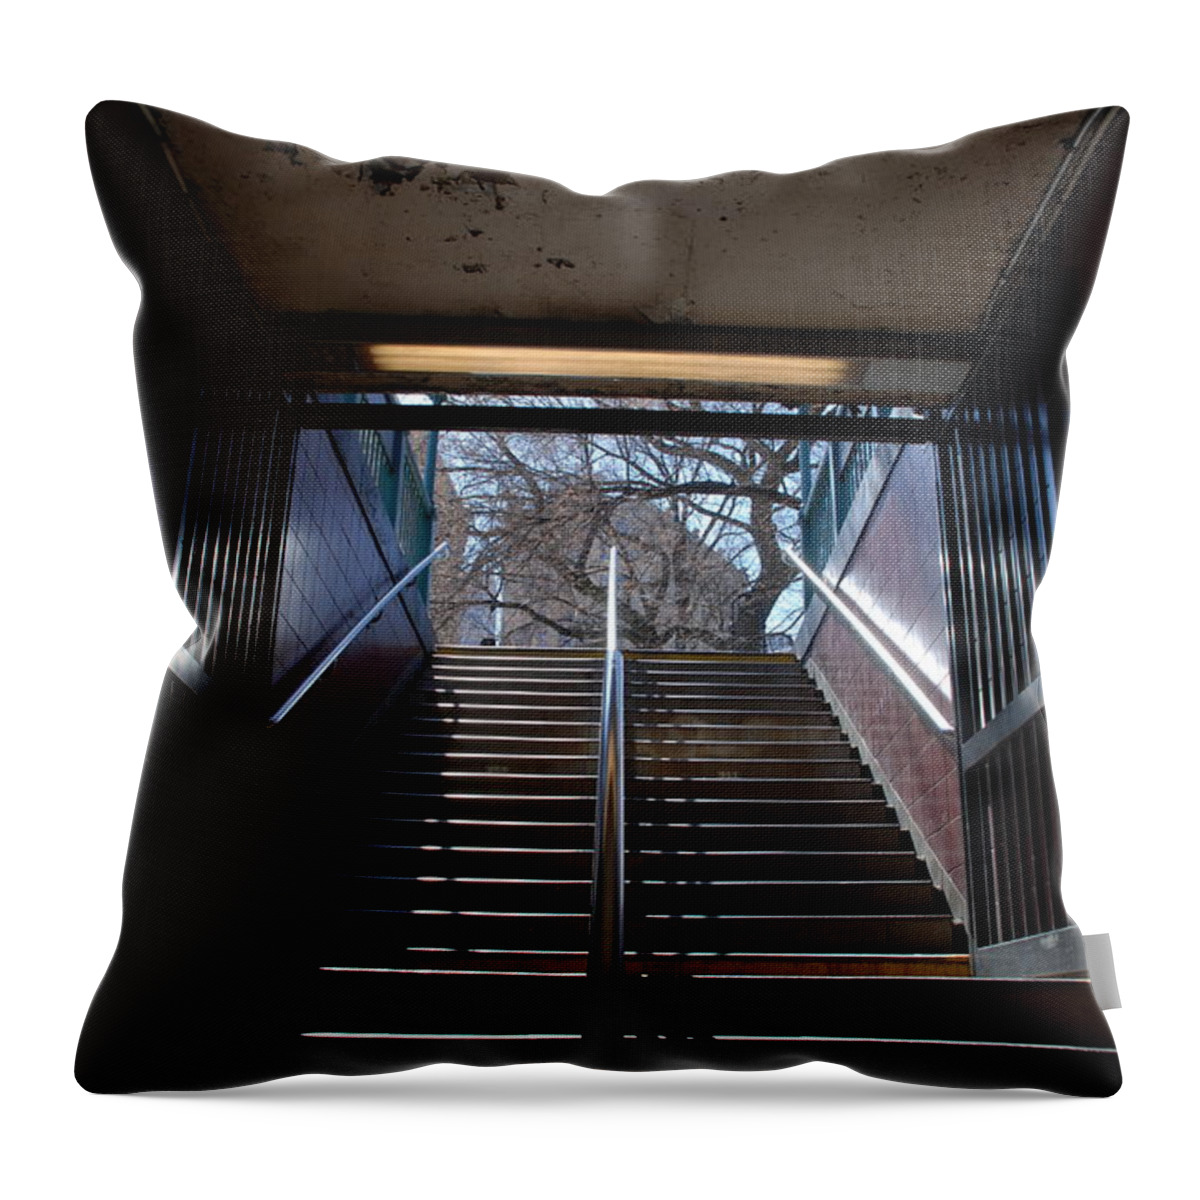 Pop Art Throw Pillow featuring the photograph Subway Stairs To Freedom by Rob Hans